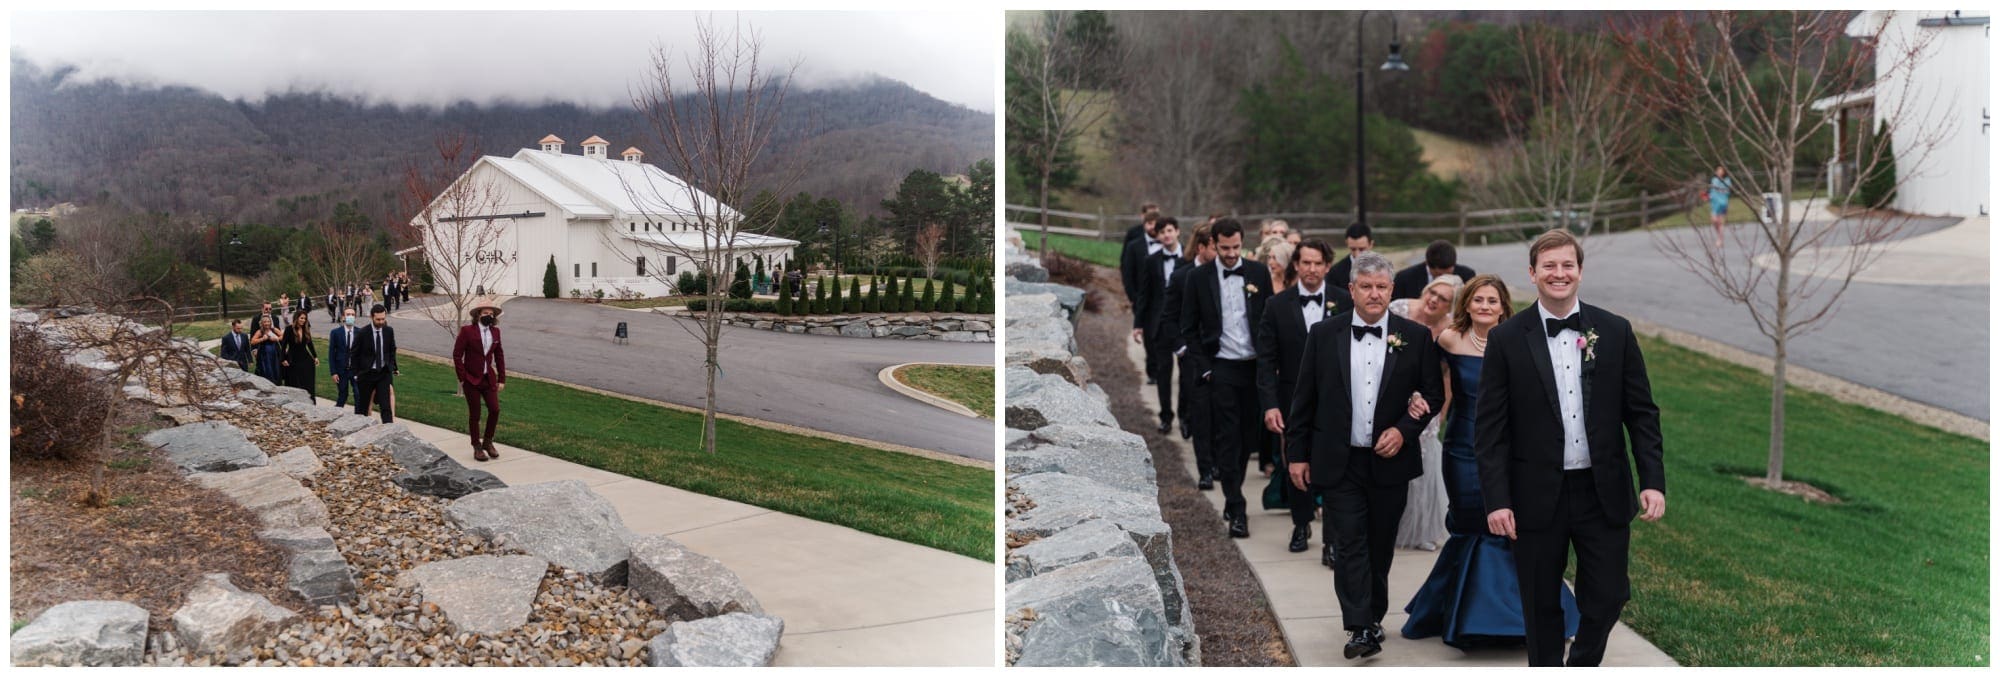 Bridal party walking up the the ceremony location at Chestnut Ridge